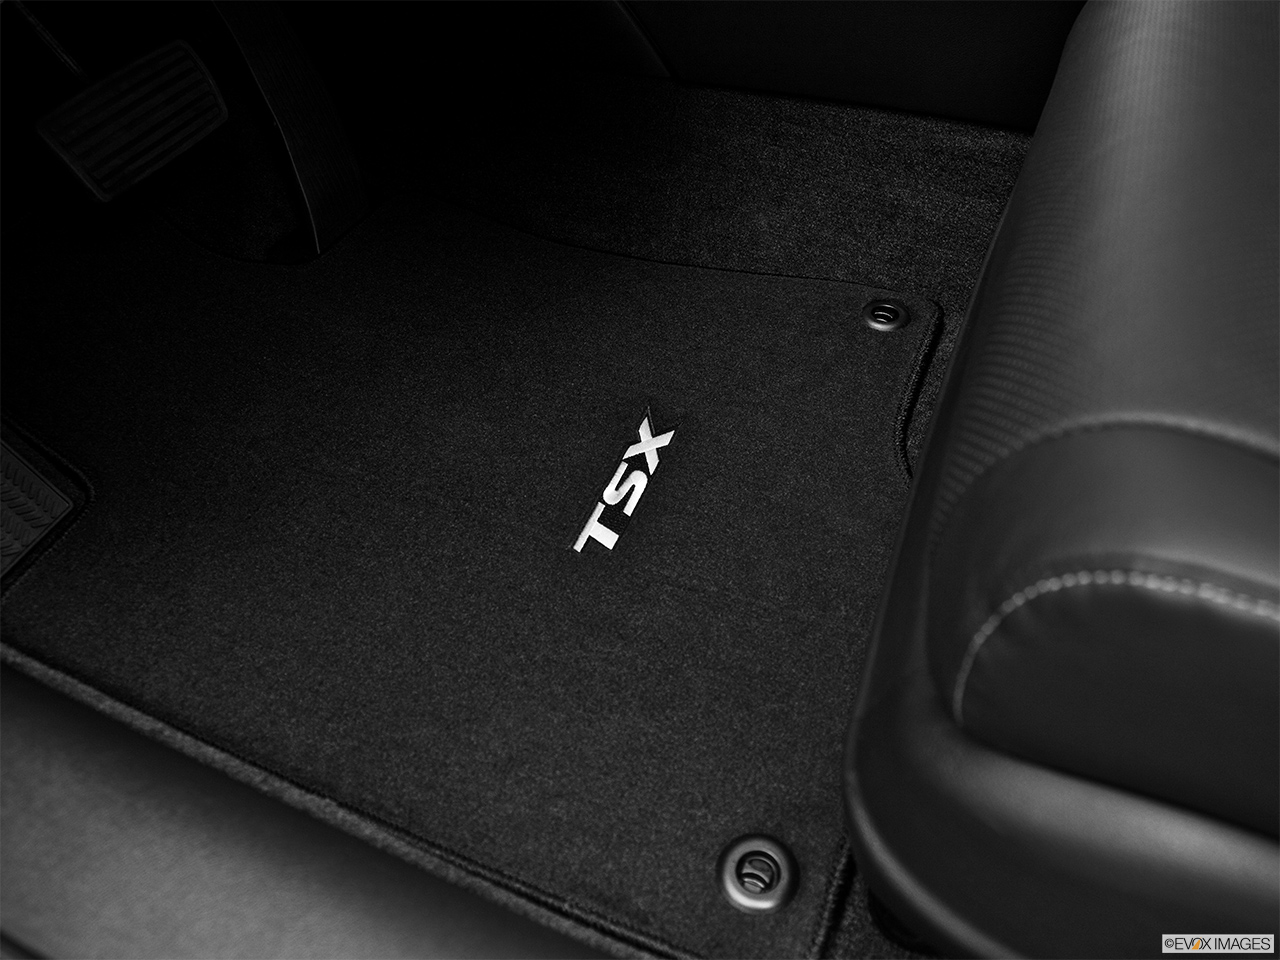 2012 Acura TSX TSX 5-speed Automatic Driver's floor mat and pedals. Mid-seat level from outside looking in. 